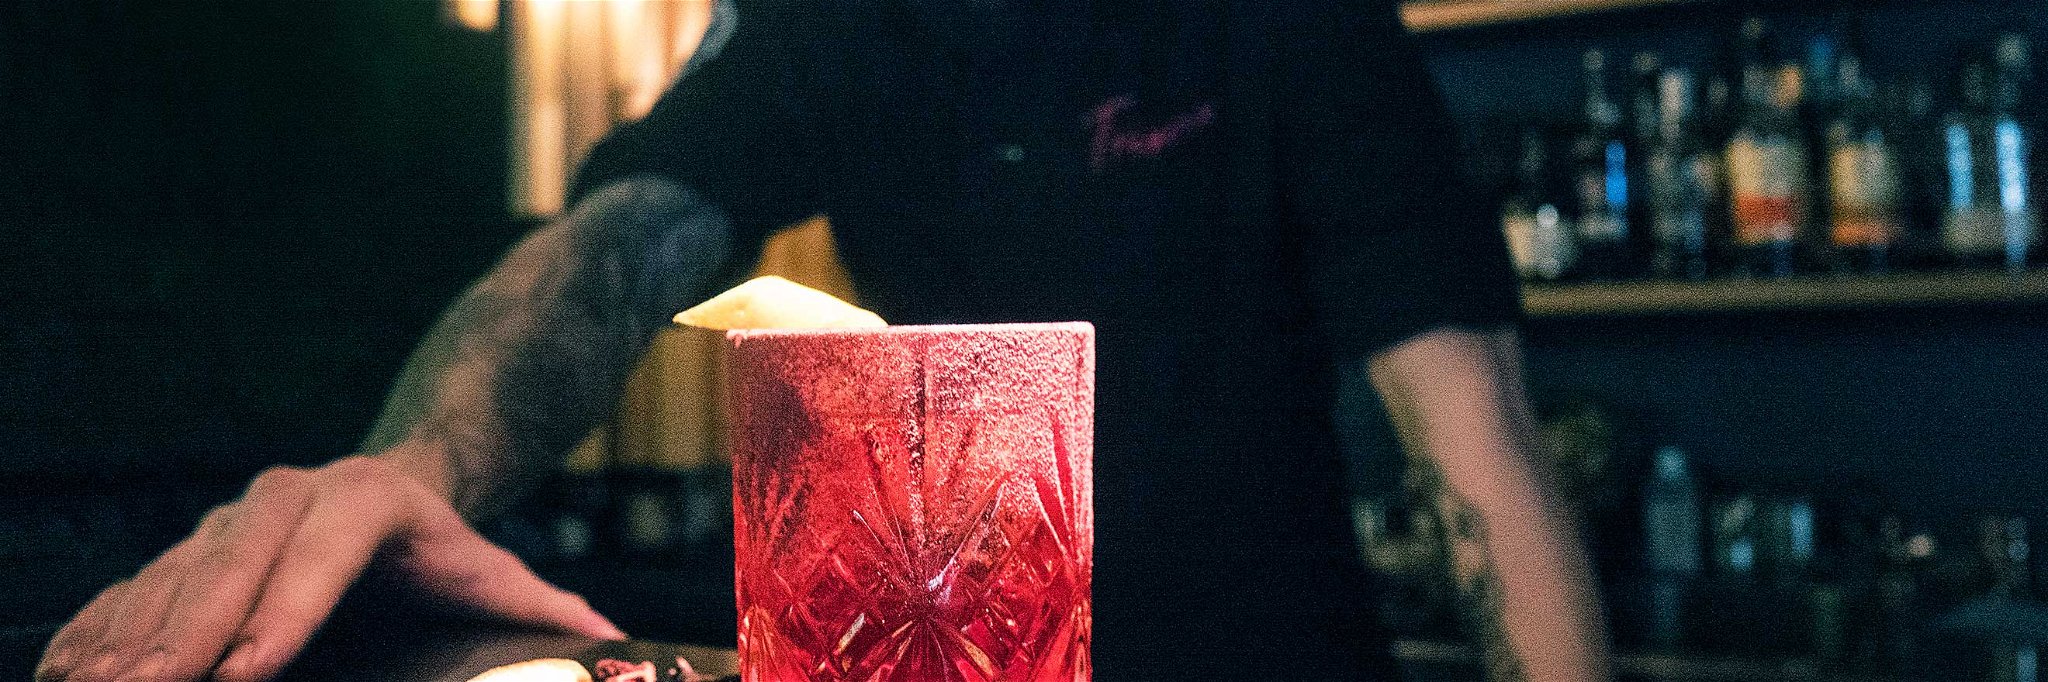 Negroni Fiore Rosso by »Trisoux«.